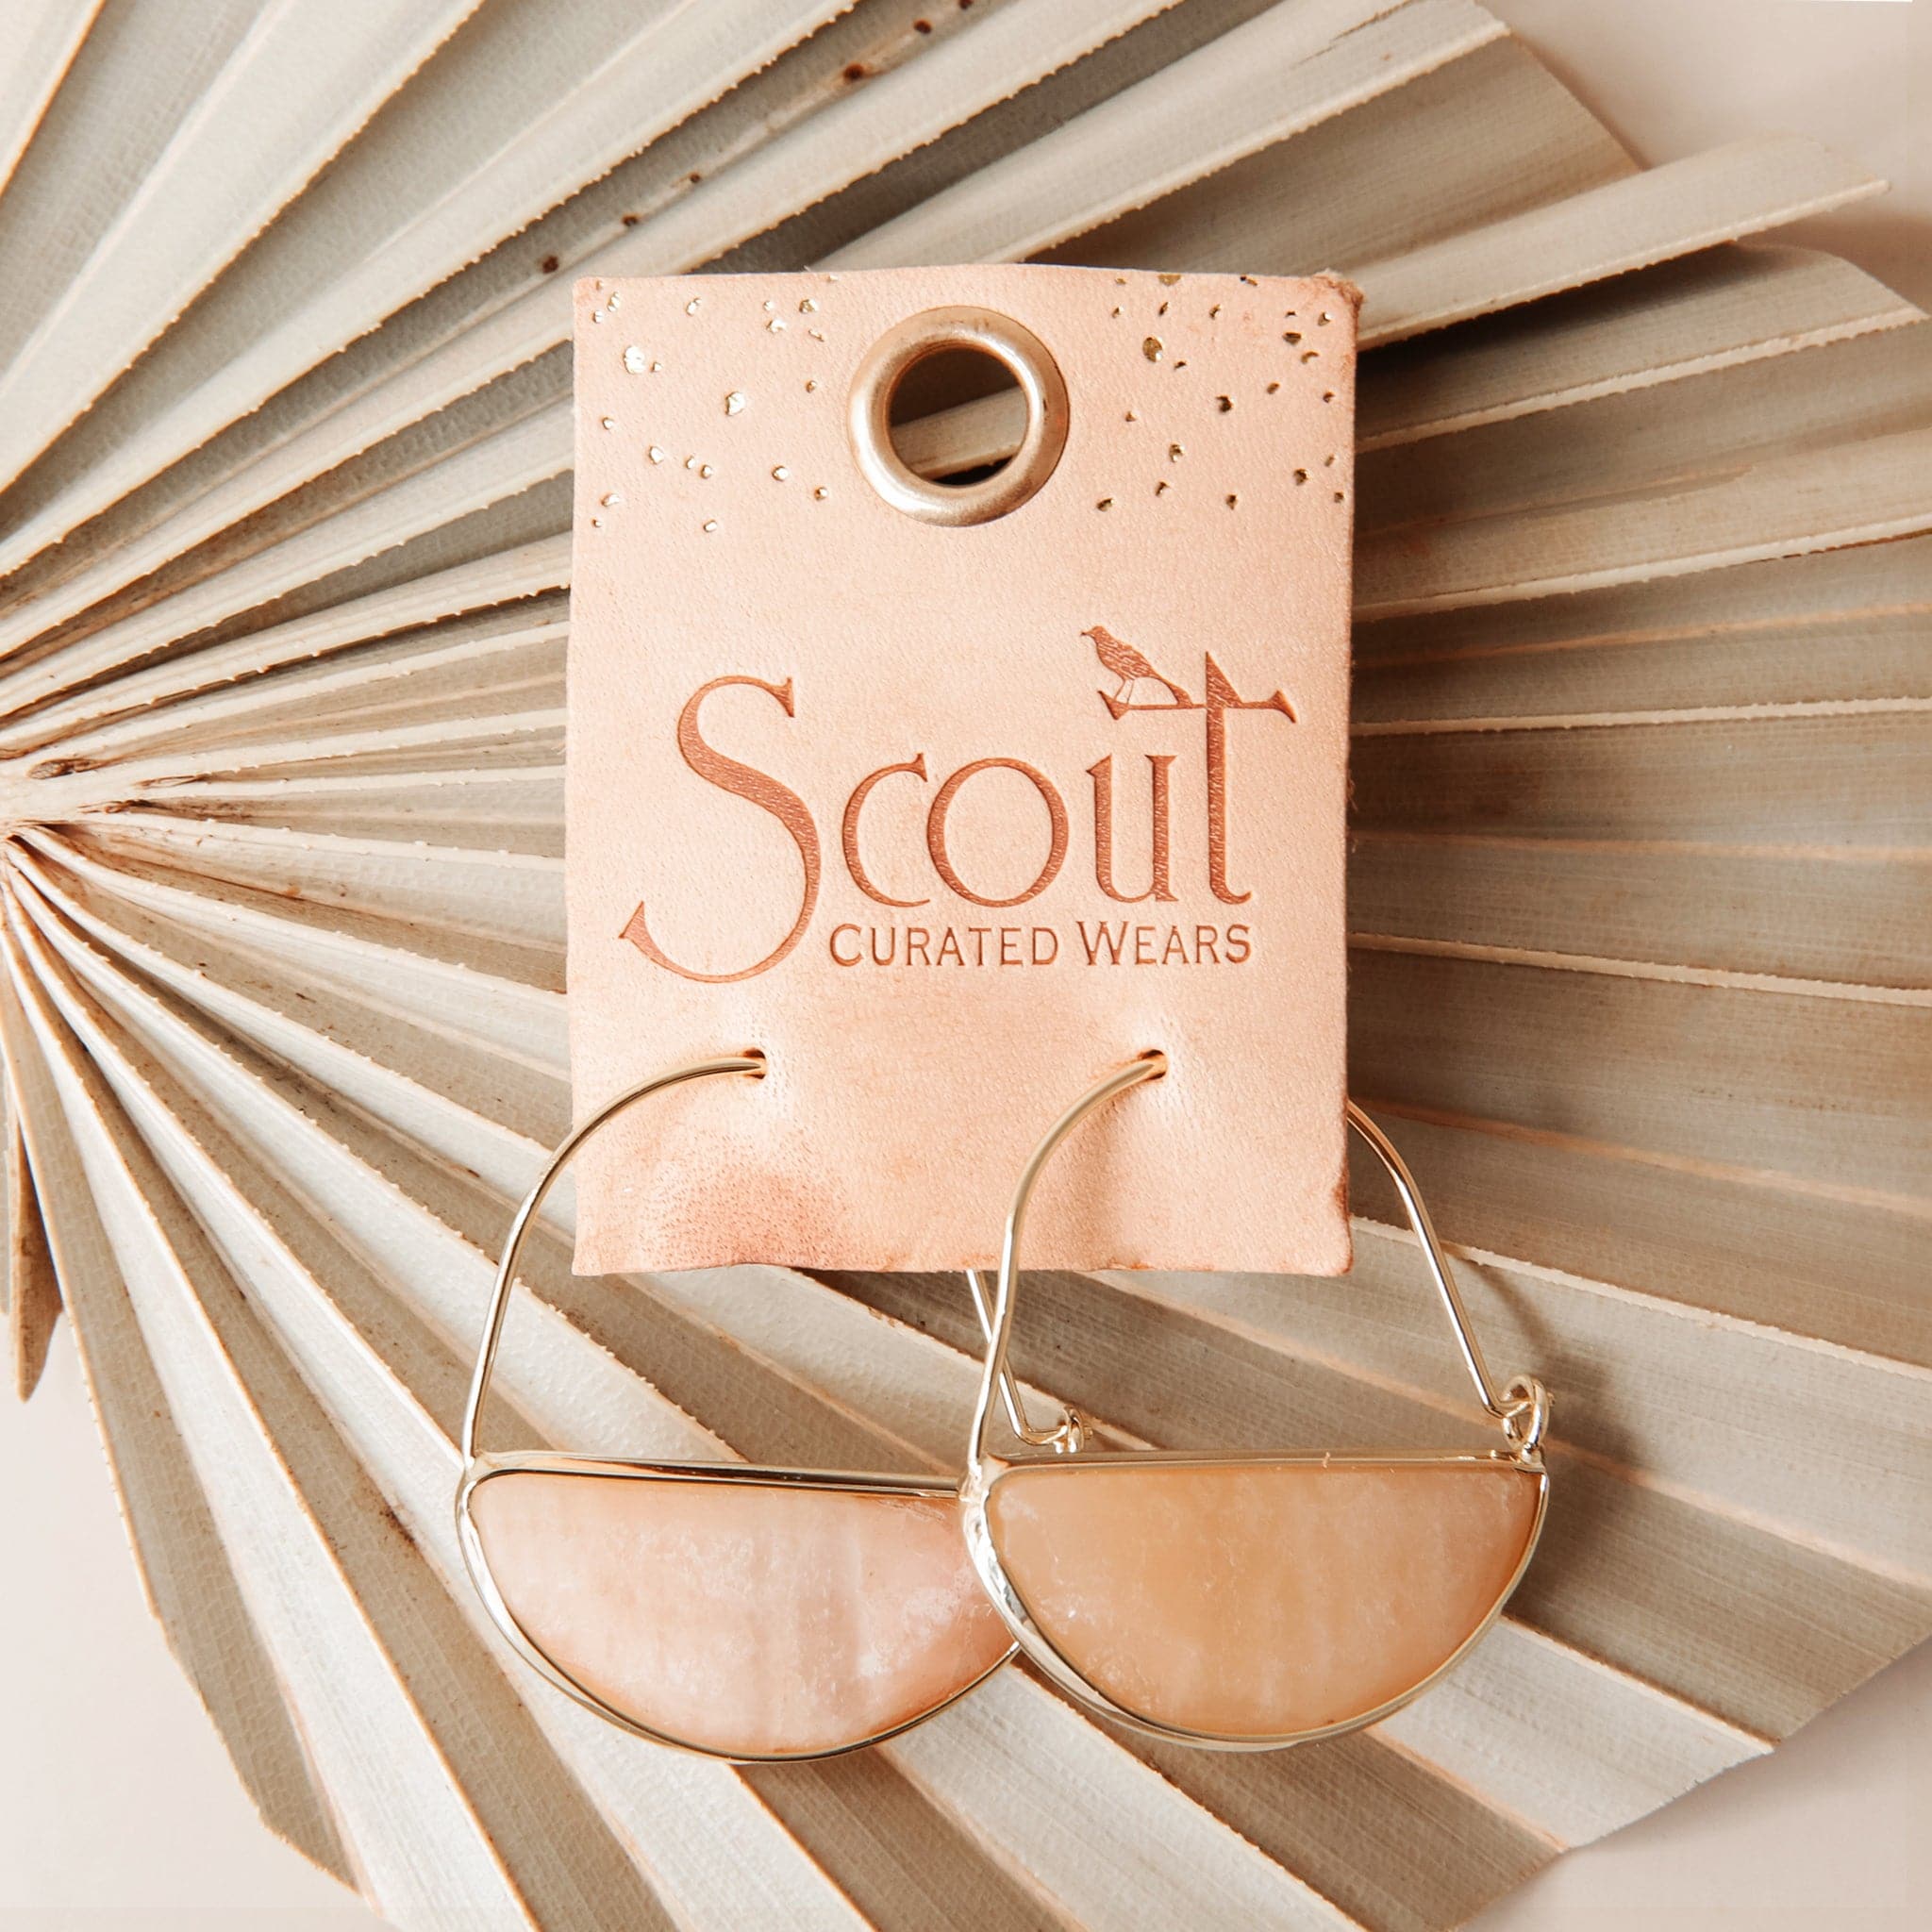 Laying on top of a dried palm frond is a pair of gold earrings. The top is a thin gold hoop. The bottom is a peach stone half circle with a gold border. The hoops are on a brown leather square holder. Etched in the middle the text reads ‘Scout curated wears.'